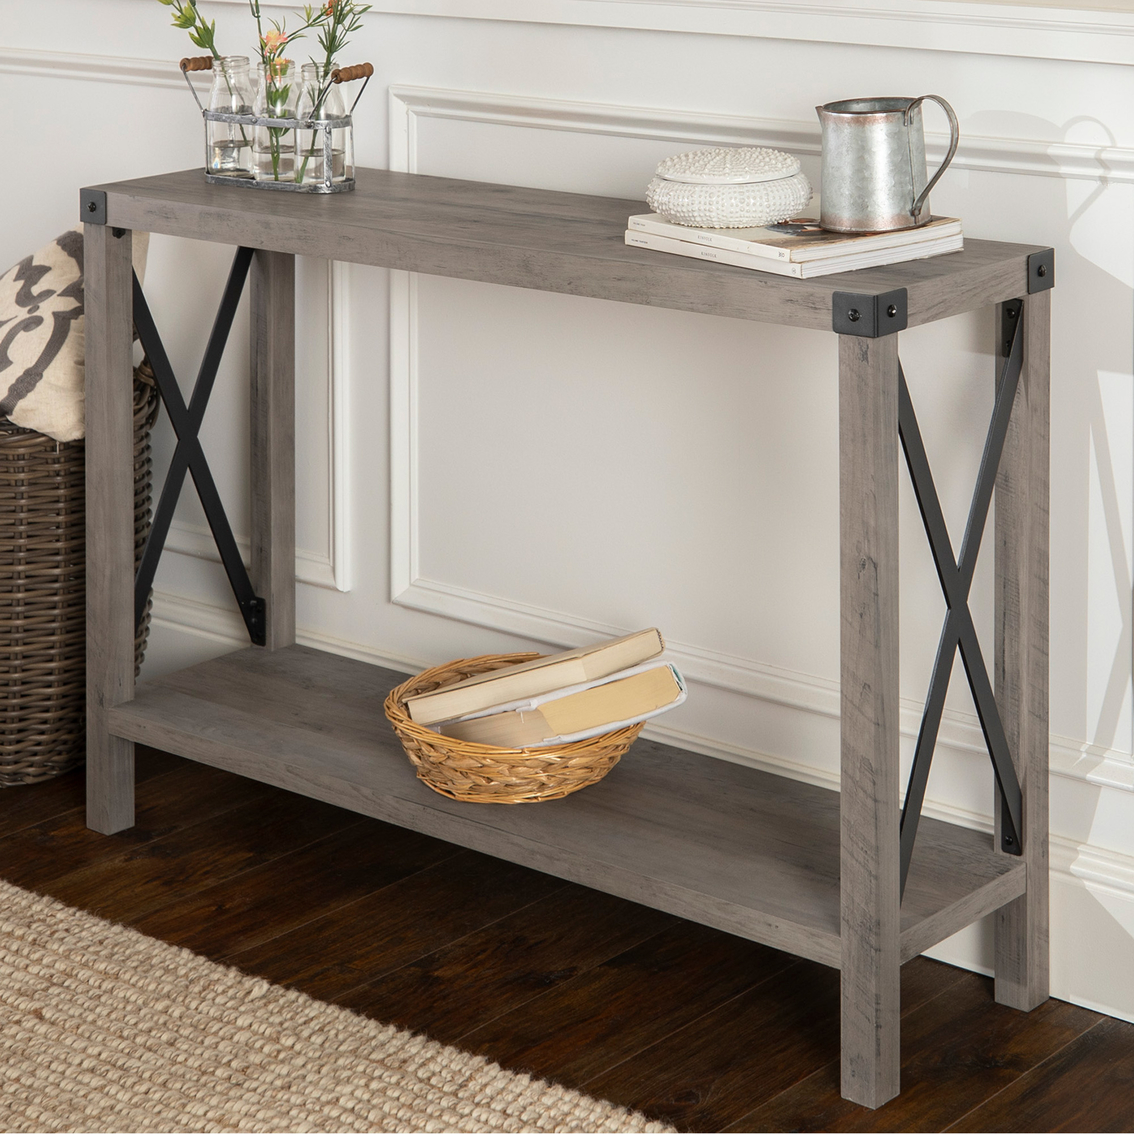 Walker Edison 46 in. Rustic Farmhouse Entryway Table - Image 4 of 4